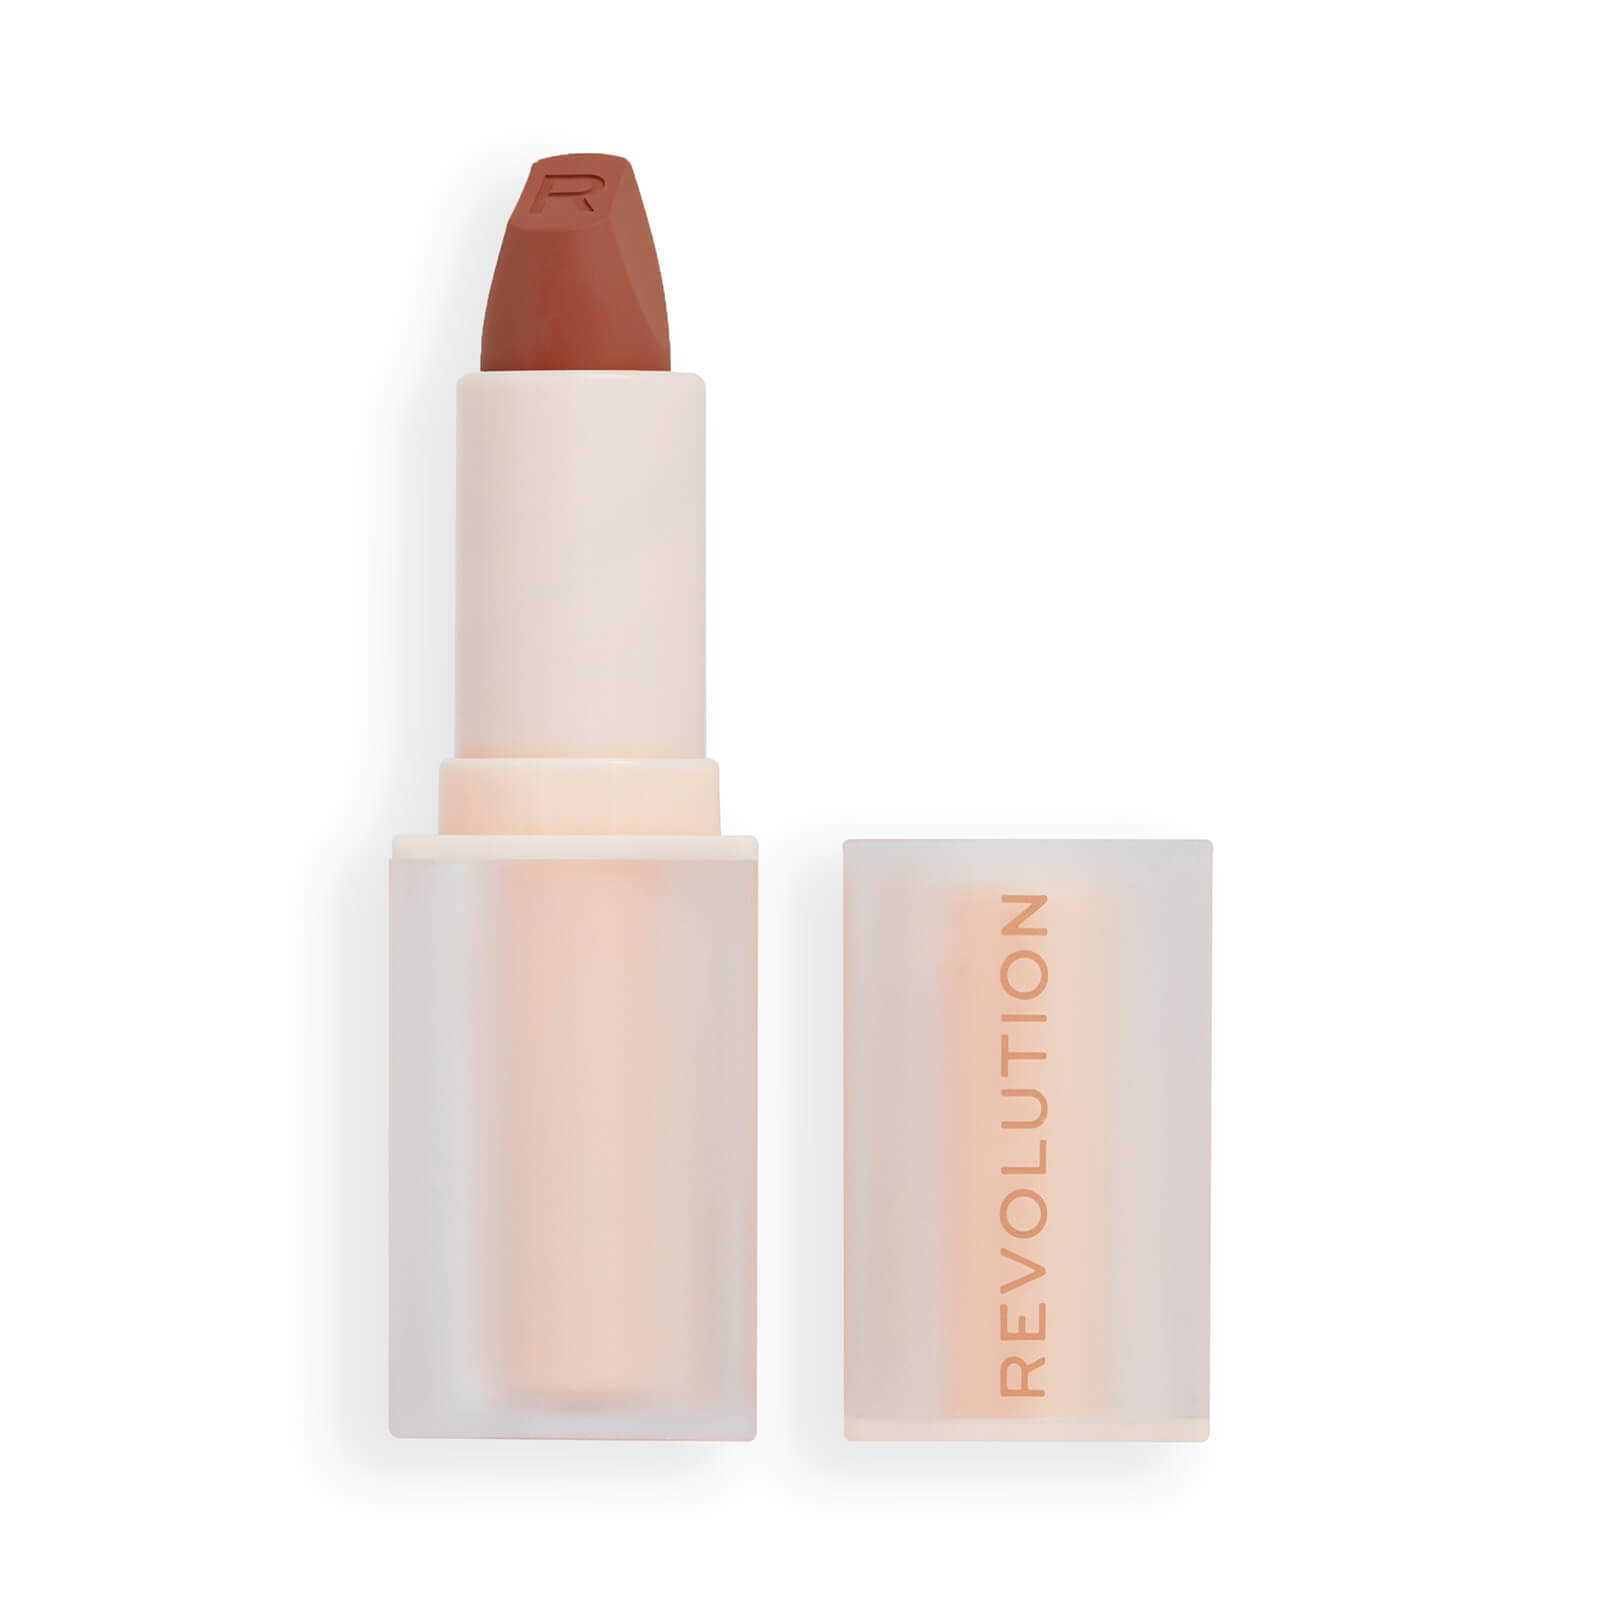 Image of Makeup Revolution Lip Allure Soft Satin Lipstick 50g (Various Shades) - Chauffeur Nude